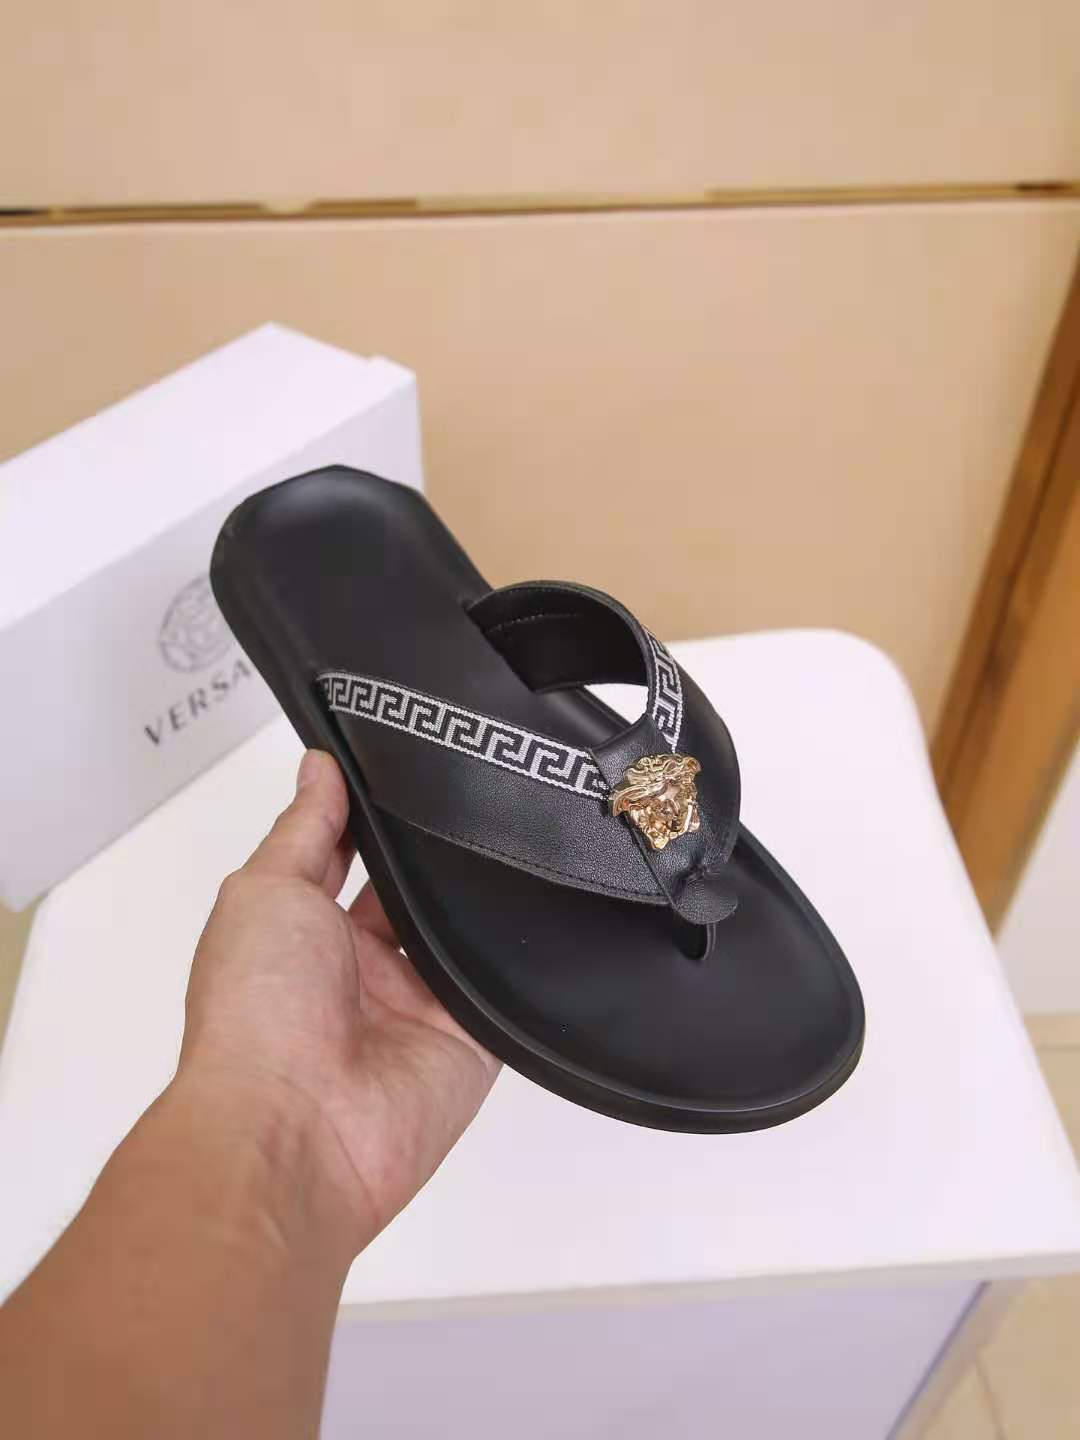 Versace Fashion Casual Slipper Shoes 35-43 13